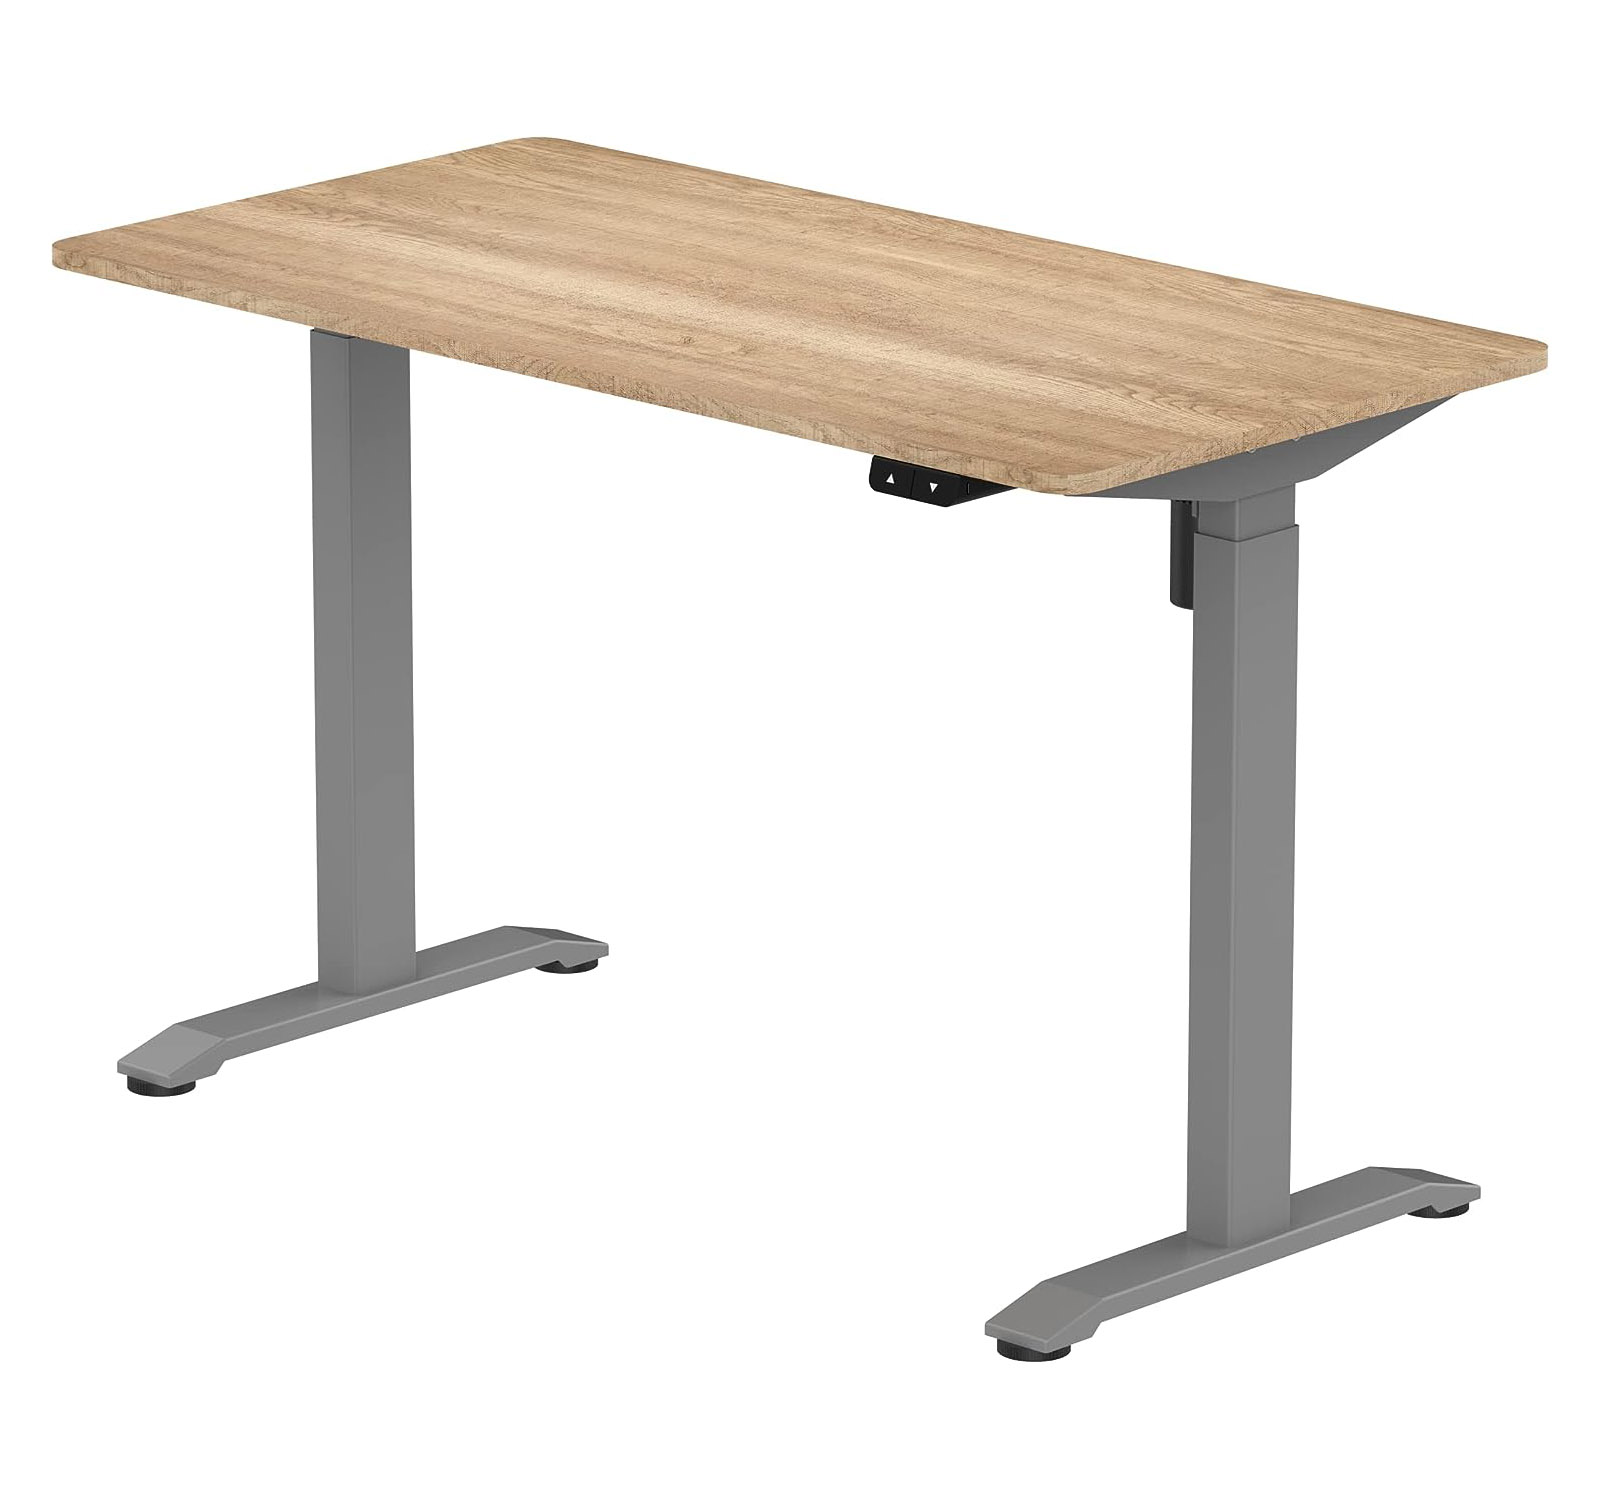 O'BELB Ergonomic Sit and Stand Electric Table (Silver+Retro Wood)